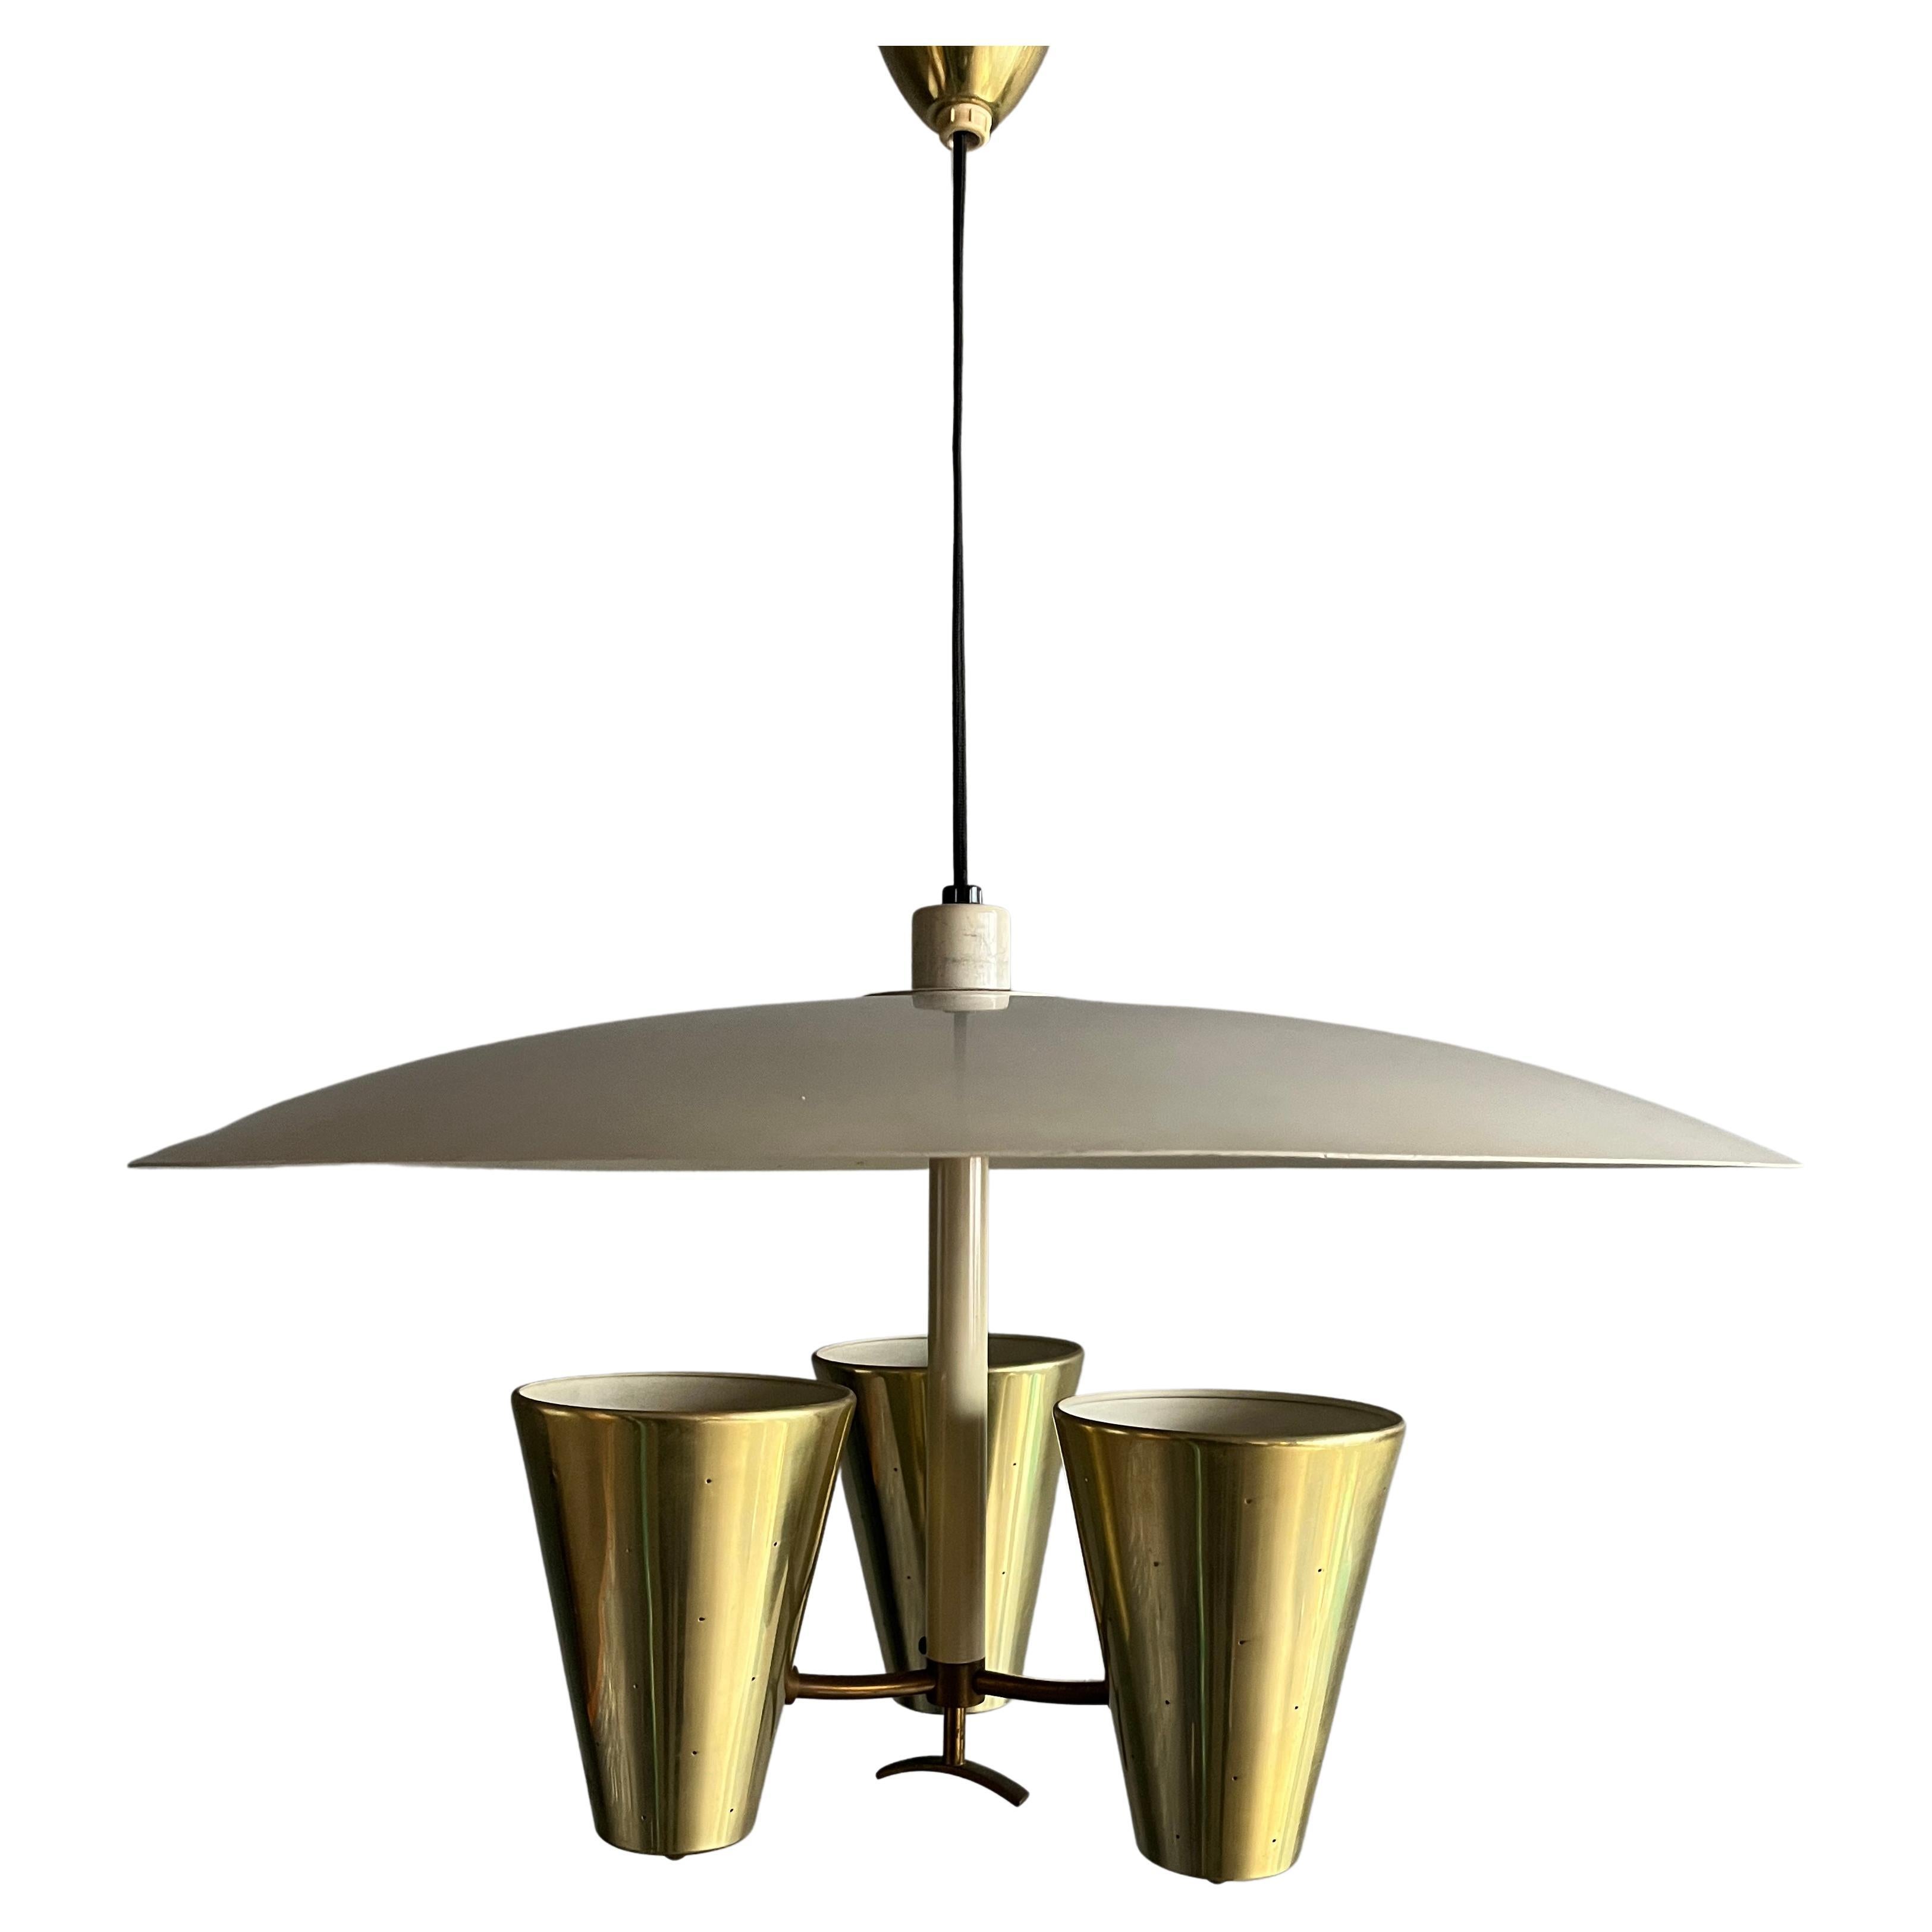 Stunning Midcentury pendant light with enameled saucer and brass perforated cones. Designed by Edward Wormley for Lightolier. Features original height adjustment 